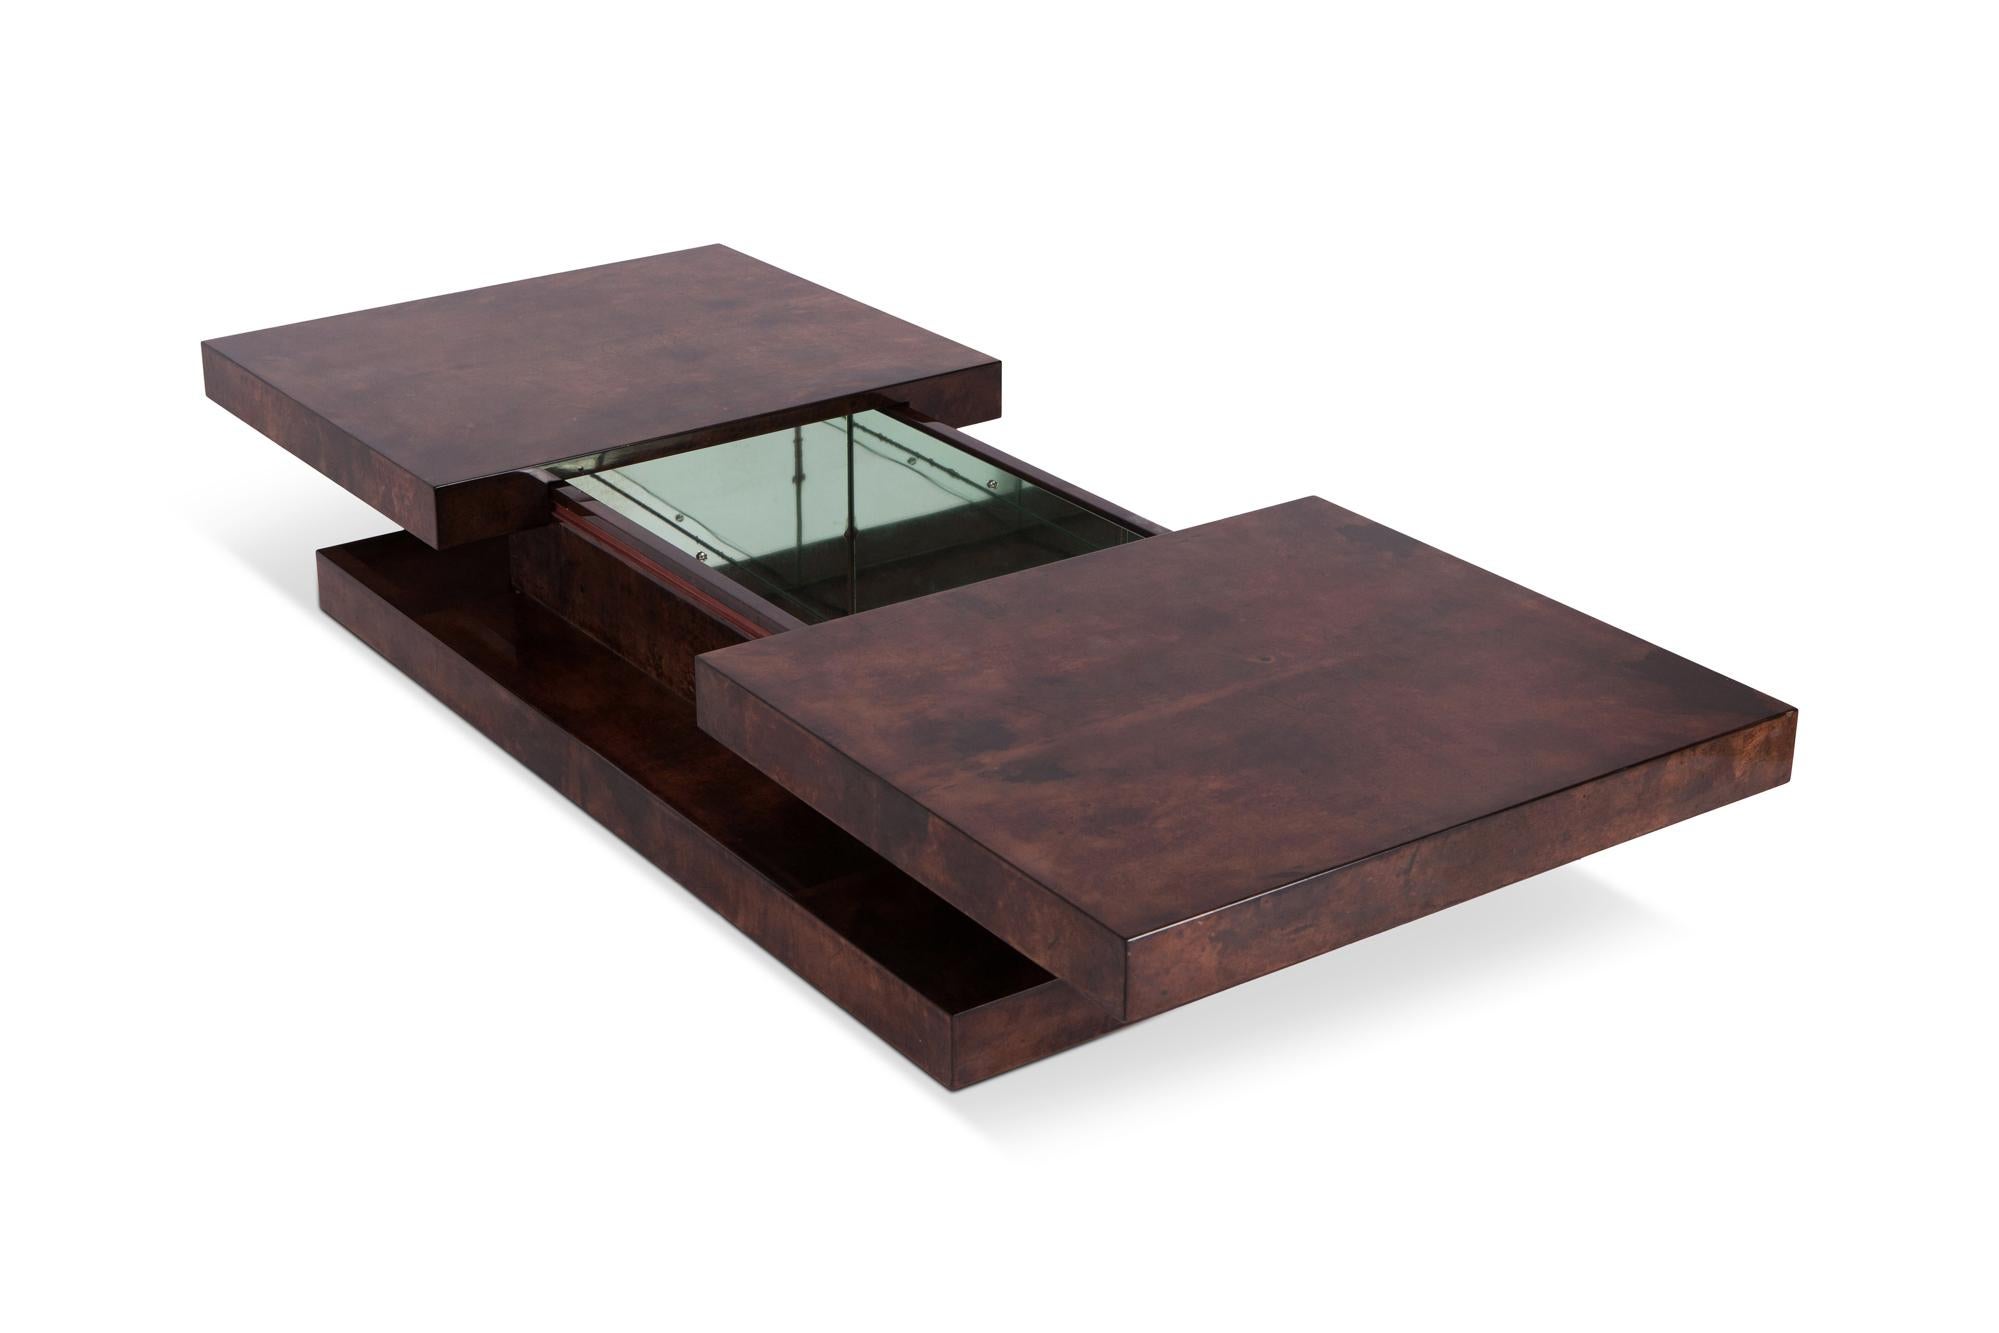 Lacquered Aldo Tura Two-Tier Sliding Coffee Table with Hidden Bar  